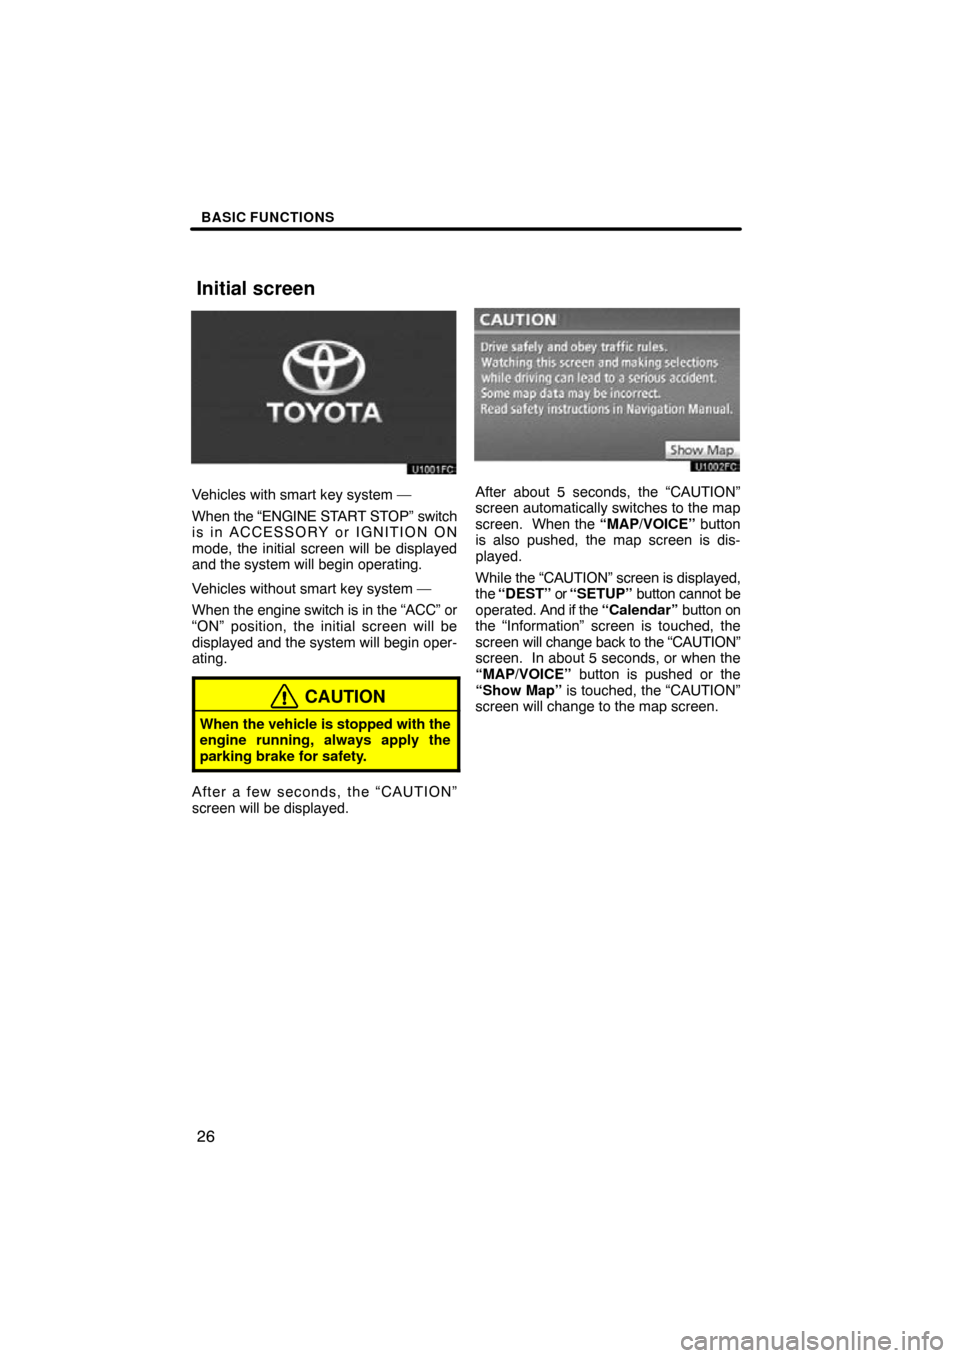 TOYOTA CAMRY 2010 XV40 / 8.G Navigation Manual BASIC FUNCTIONS
26
Vehicles with smart key system —
When the “ENGINE START STOP” switch
is in ACCESSORY or IGNITION ON
mode, the initial screen will be displayed
and the system will begin operat